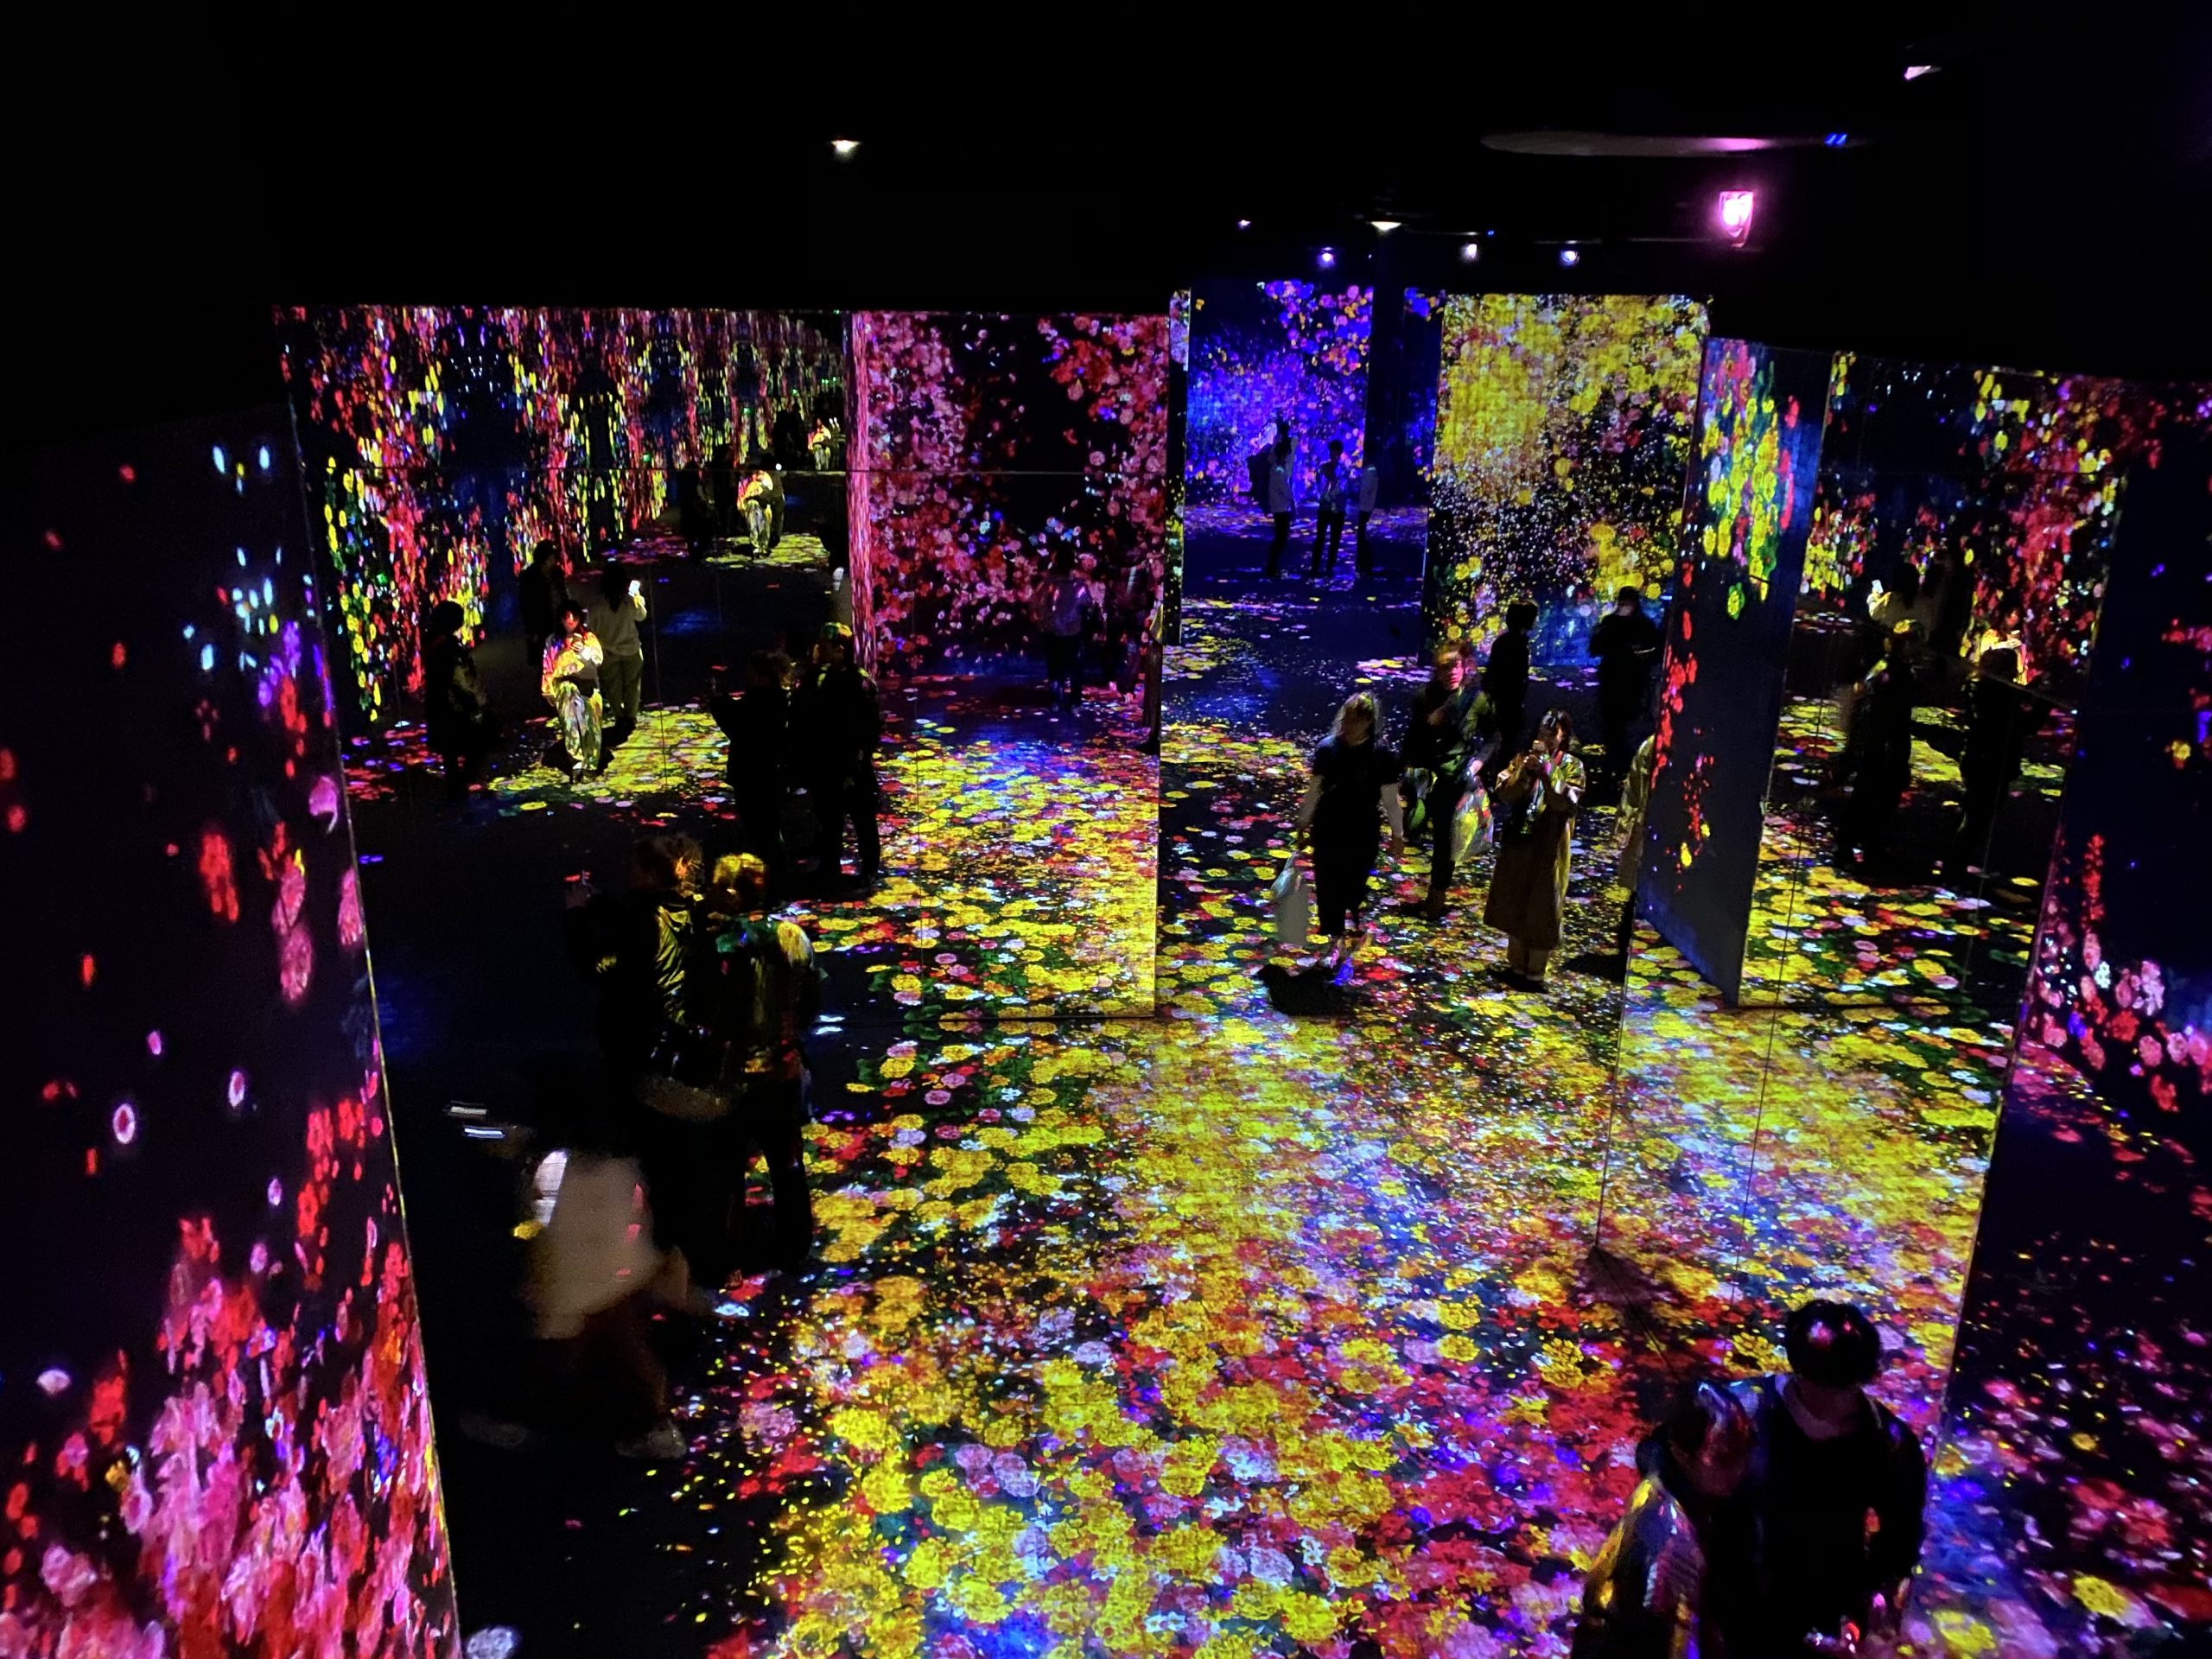 Flowers are projected onto every surface of the room creating a borderless feel